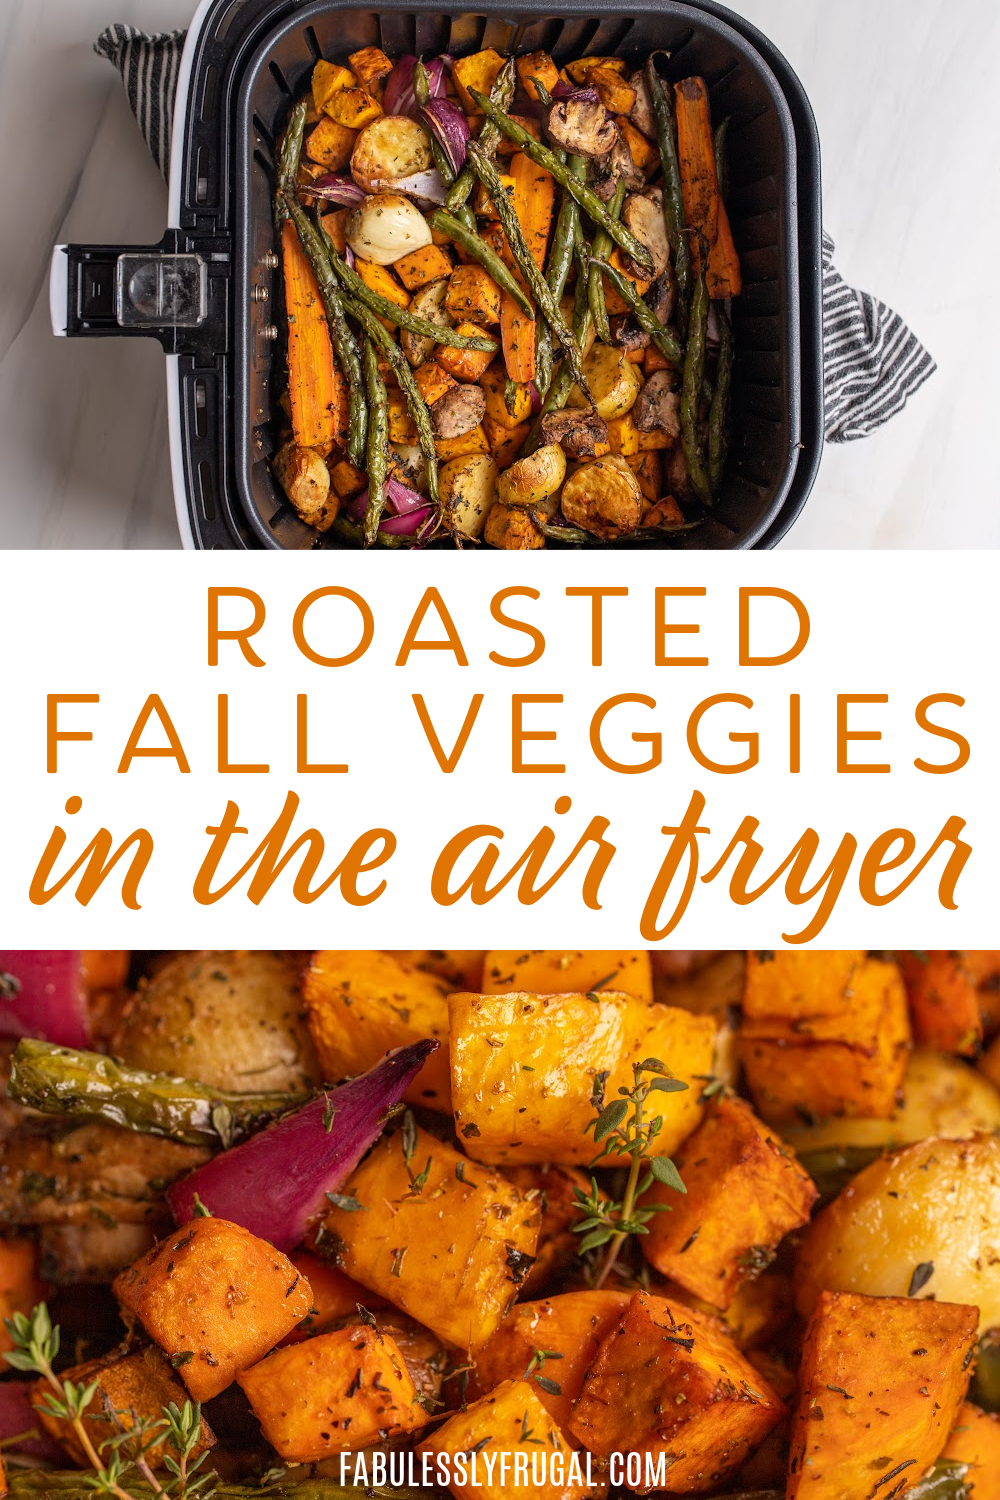 https://fabulesslyfrugal.com/wp-content/uploads/2021/11/how-to-make-roasted-fall-vegetables-in-the-air-fryer-1.png